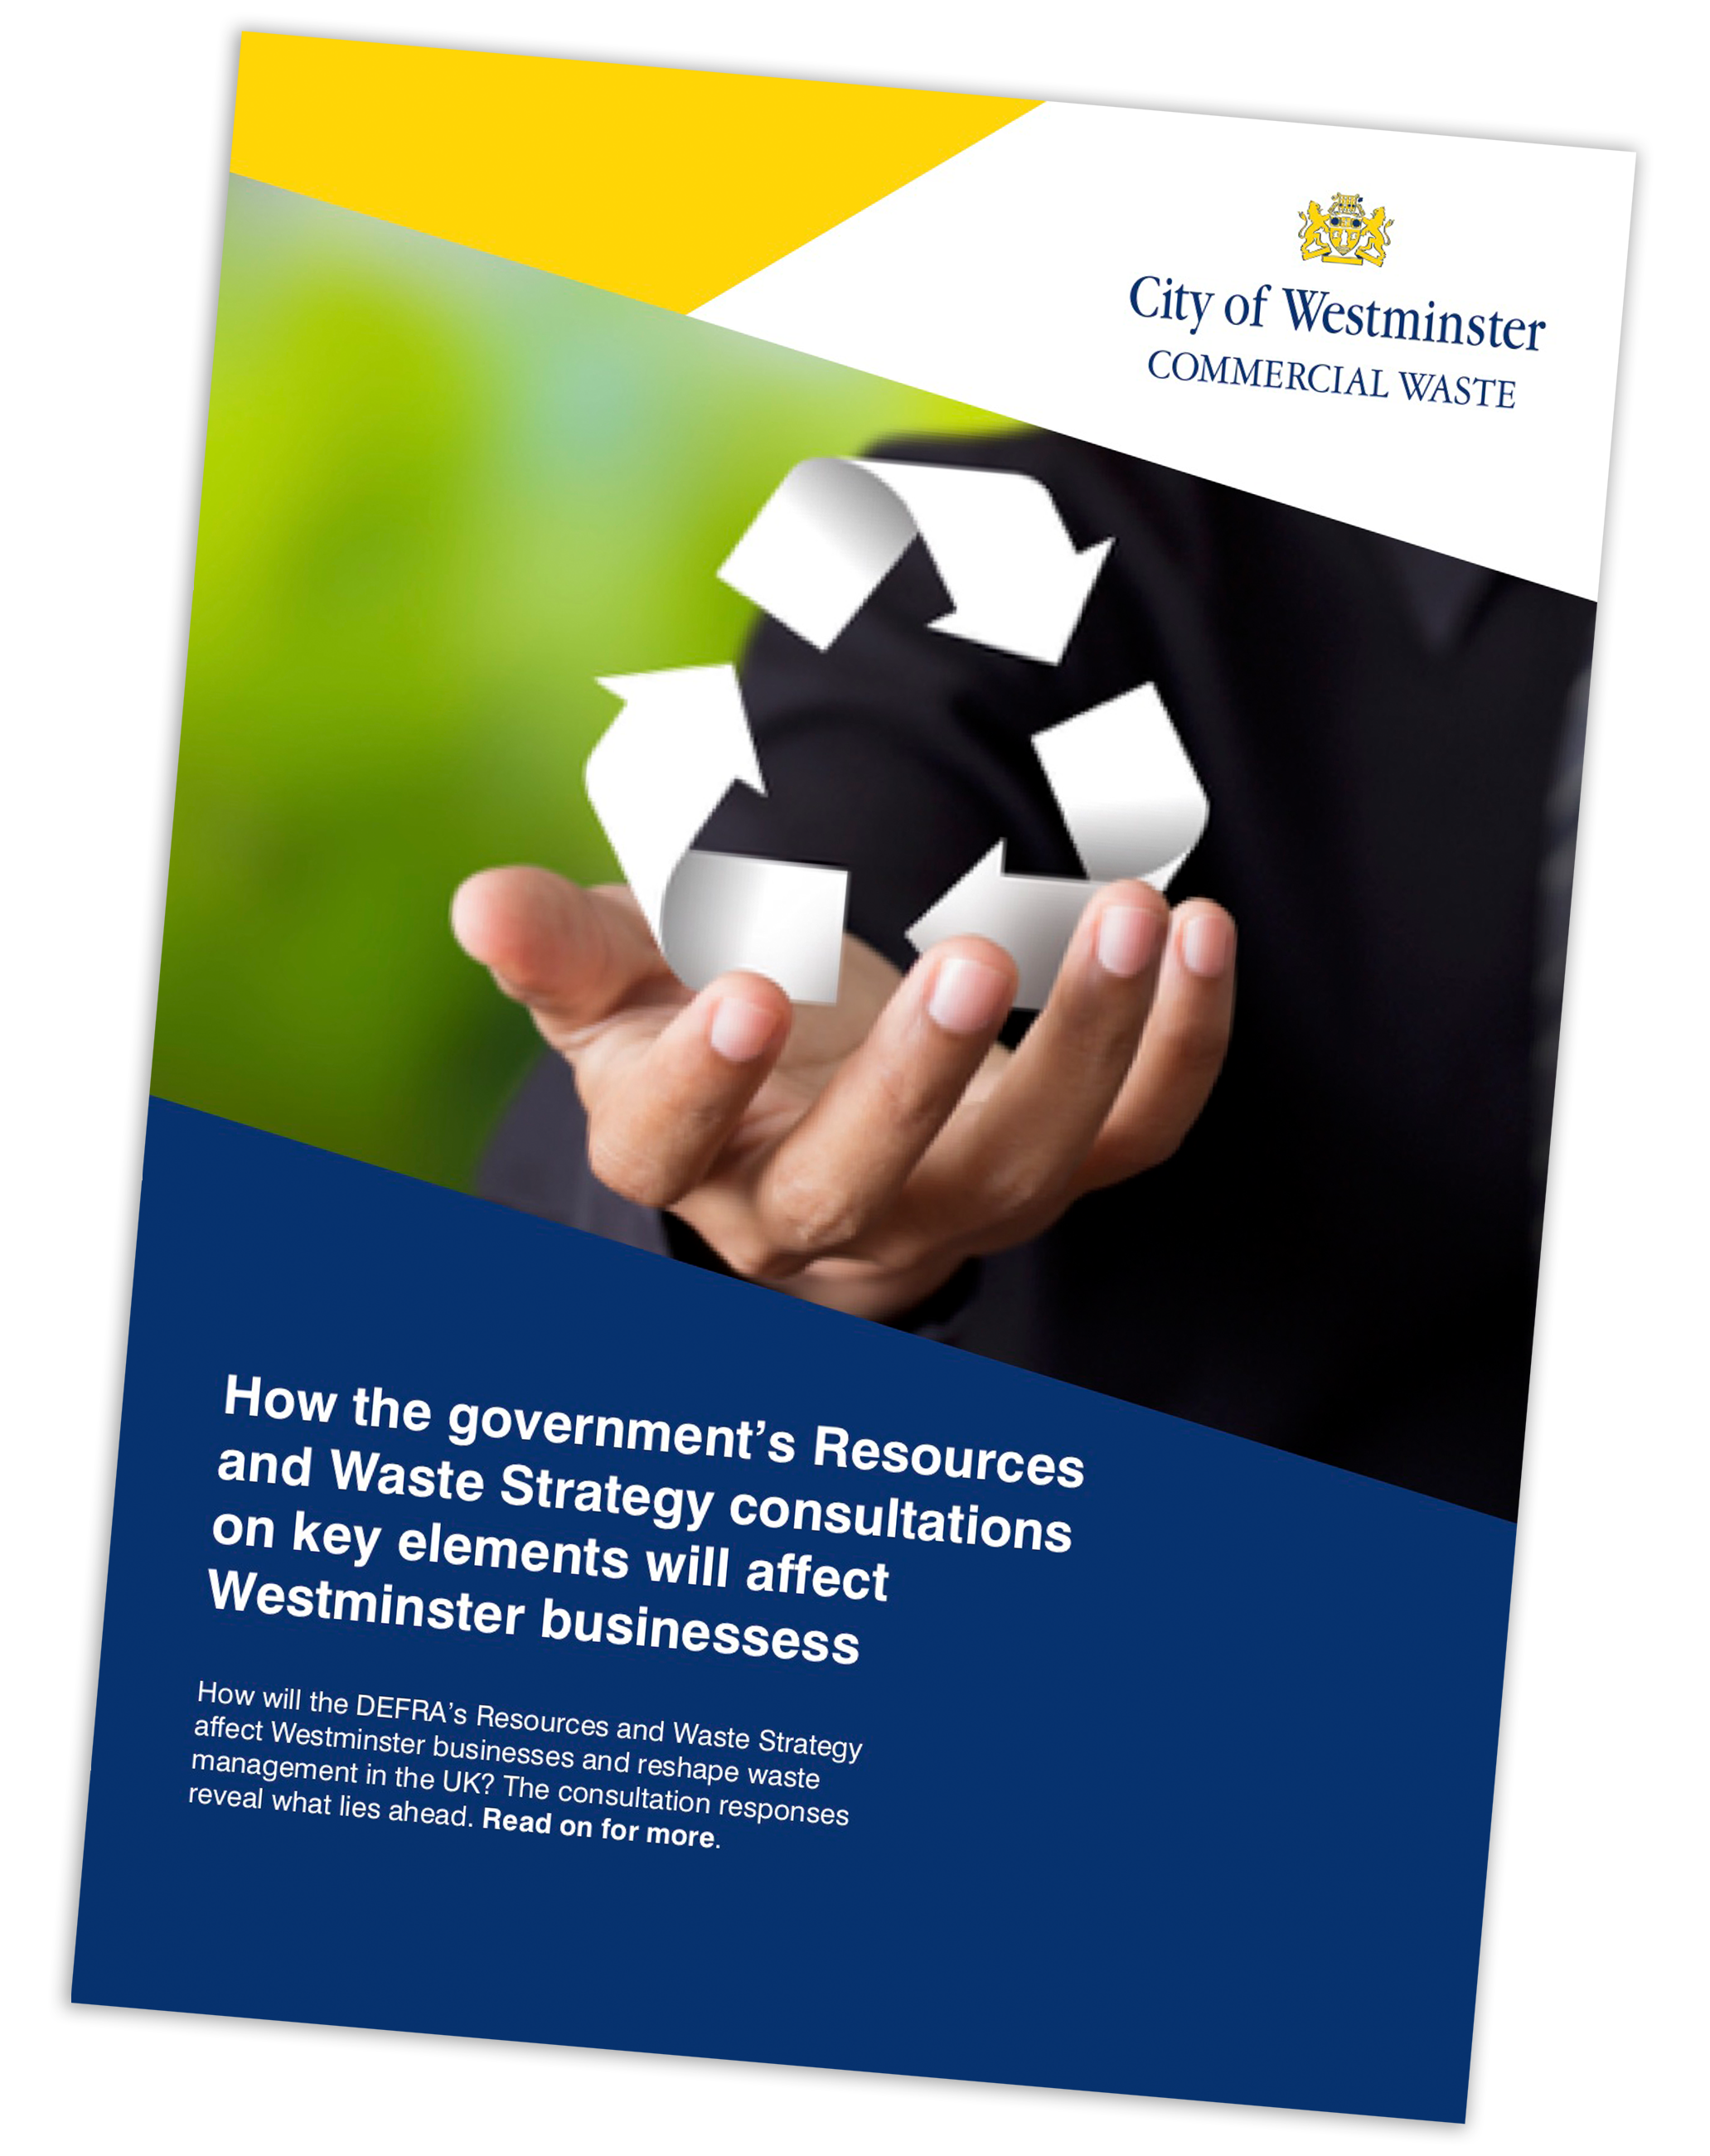 Governments Resources and Waste Strategy